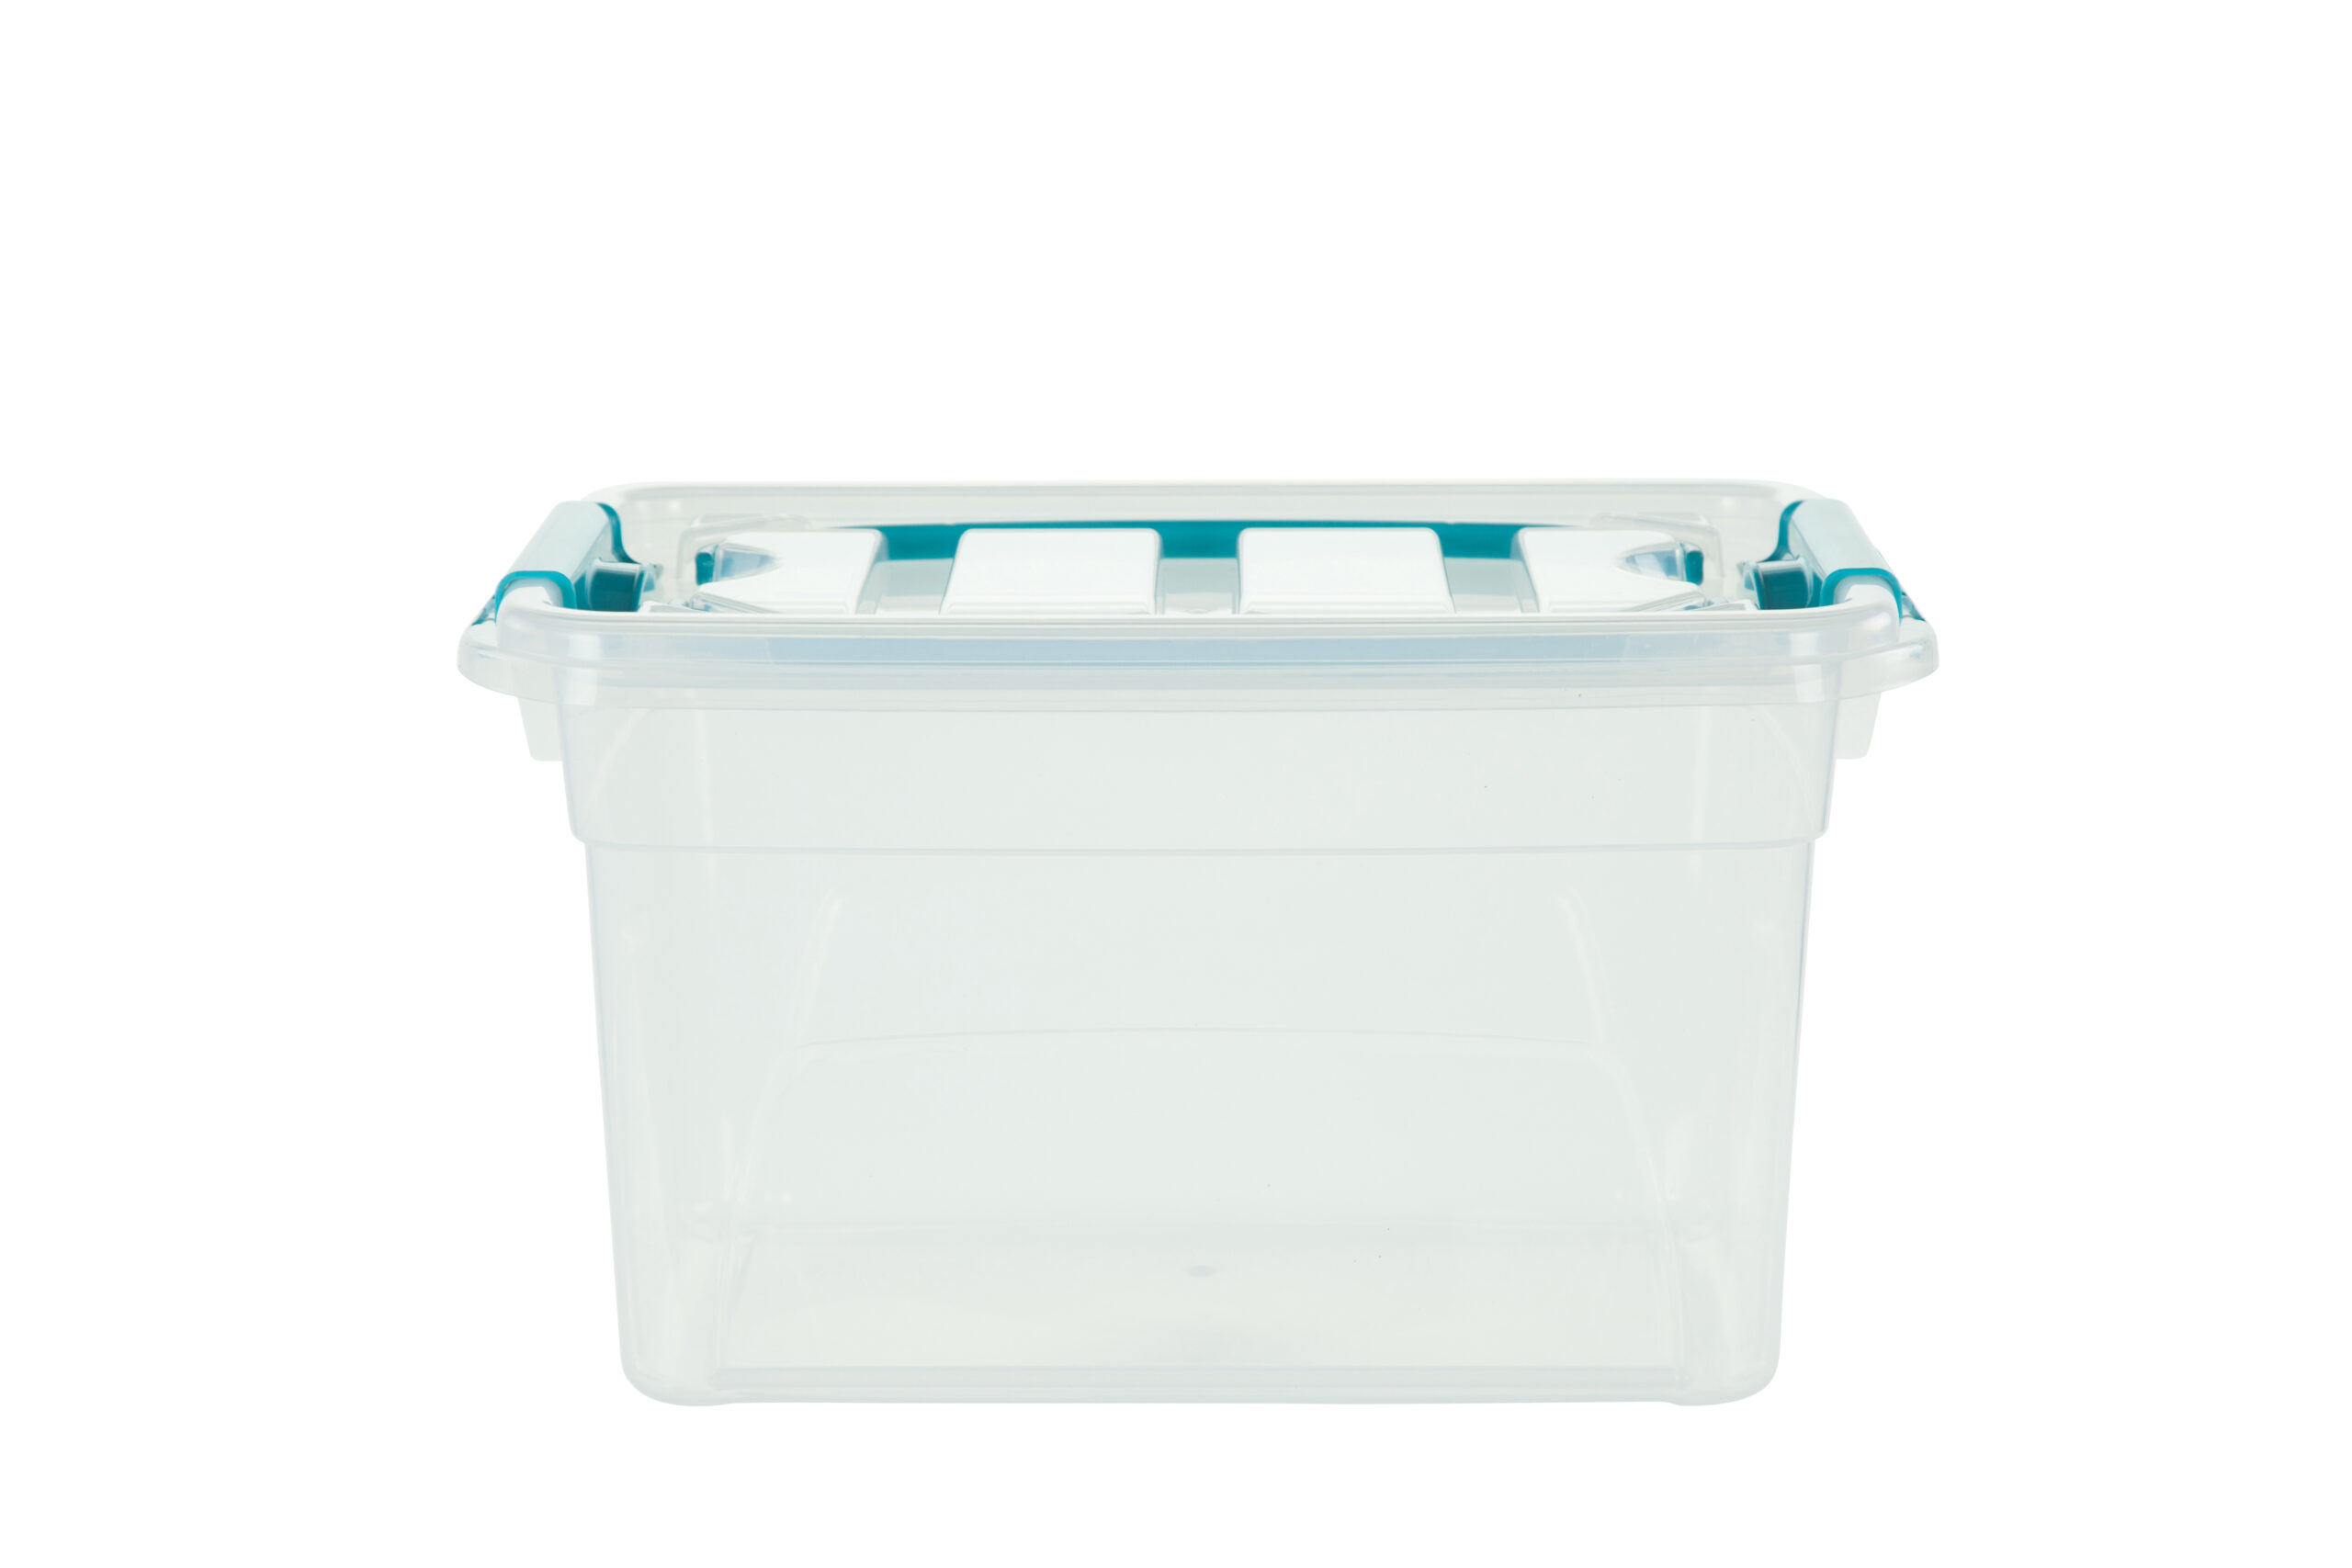 White Furze Carry Box 13litre Teal